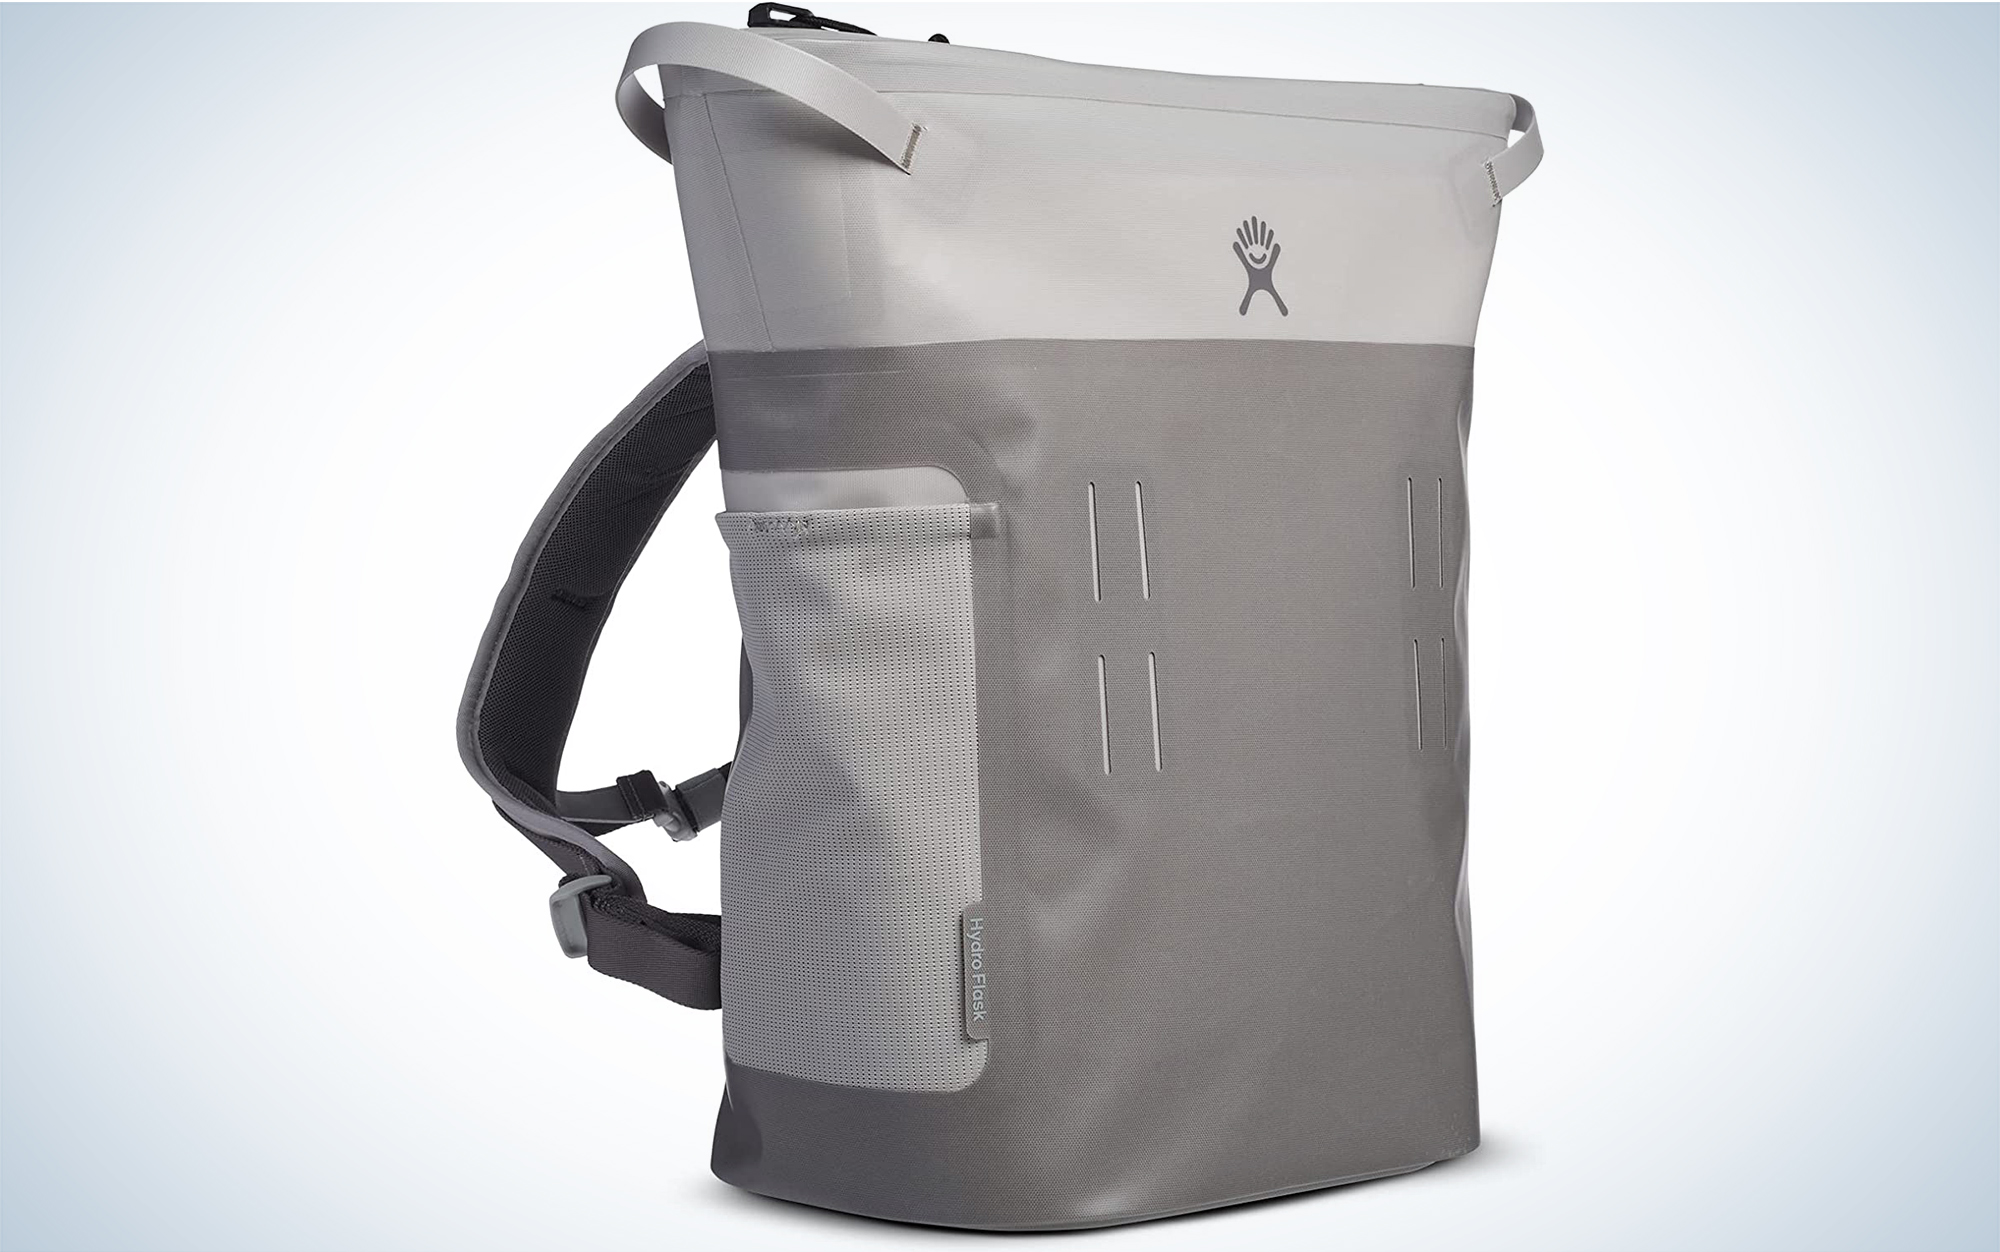 The Hydroflask Day Escape is one of the best hiking daypacks.